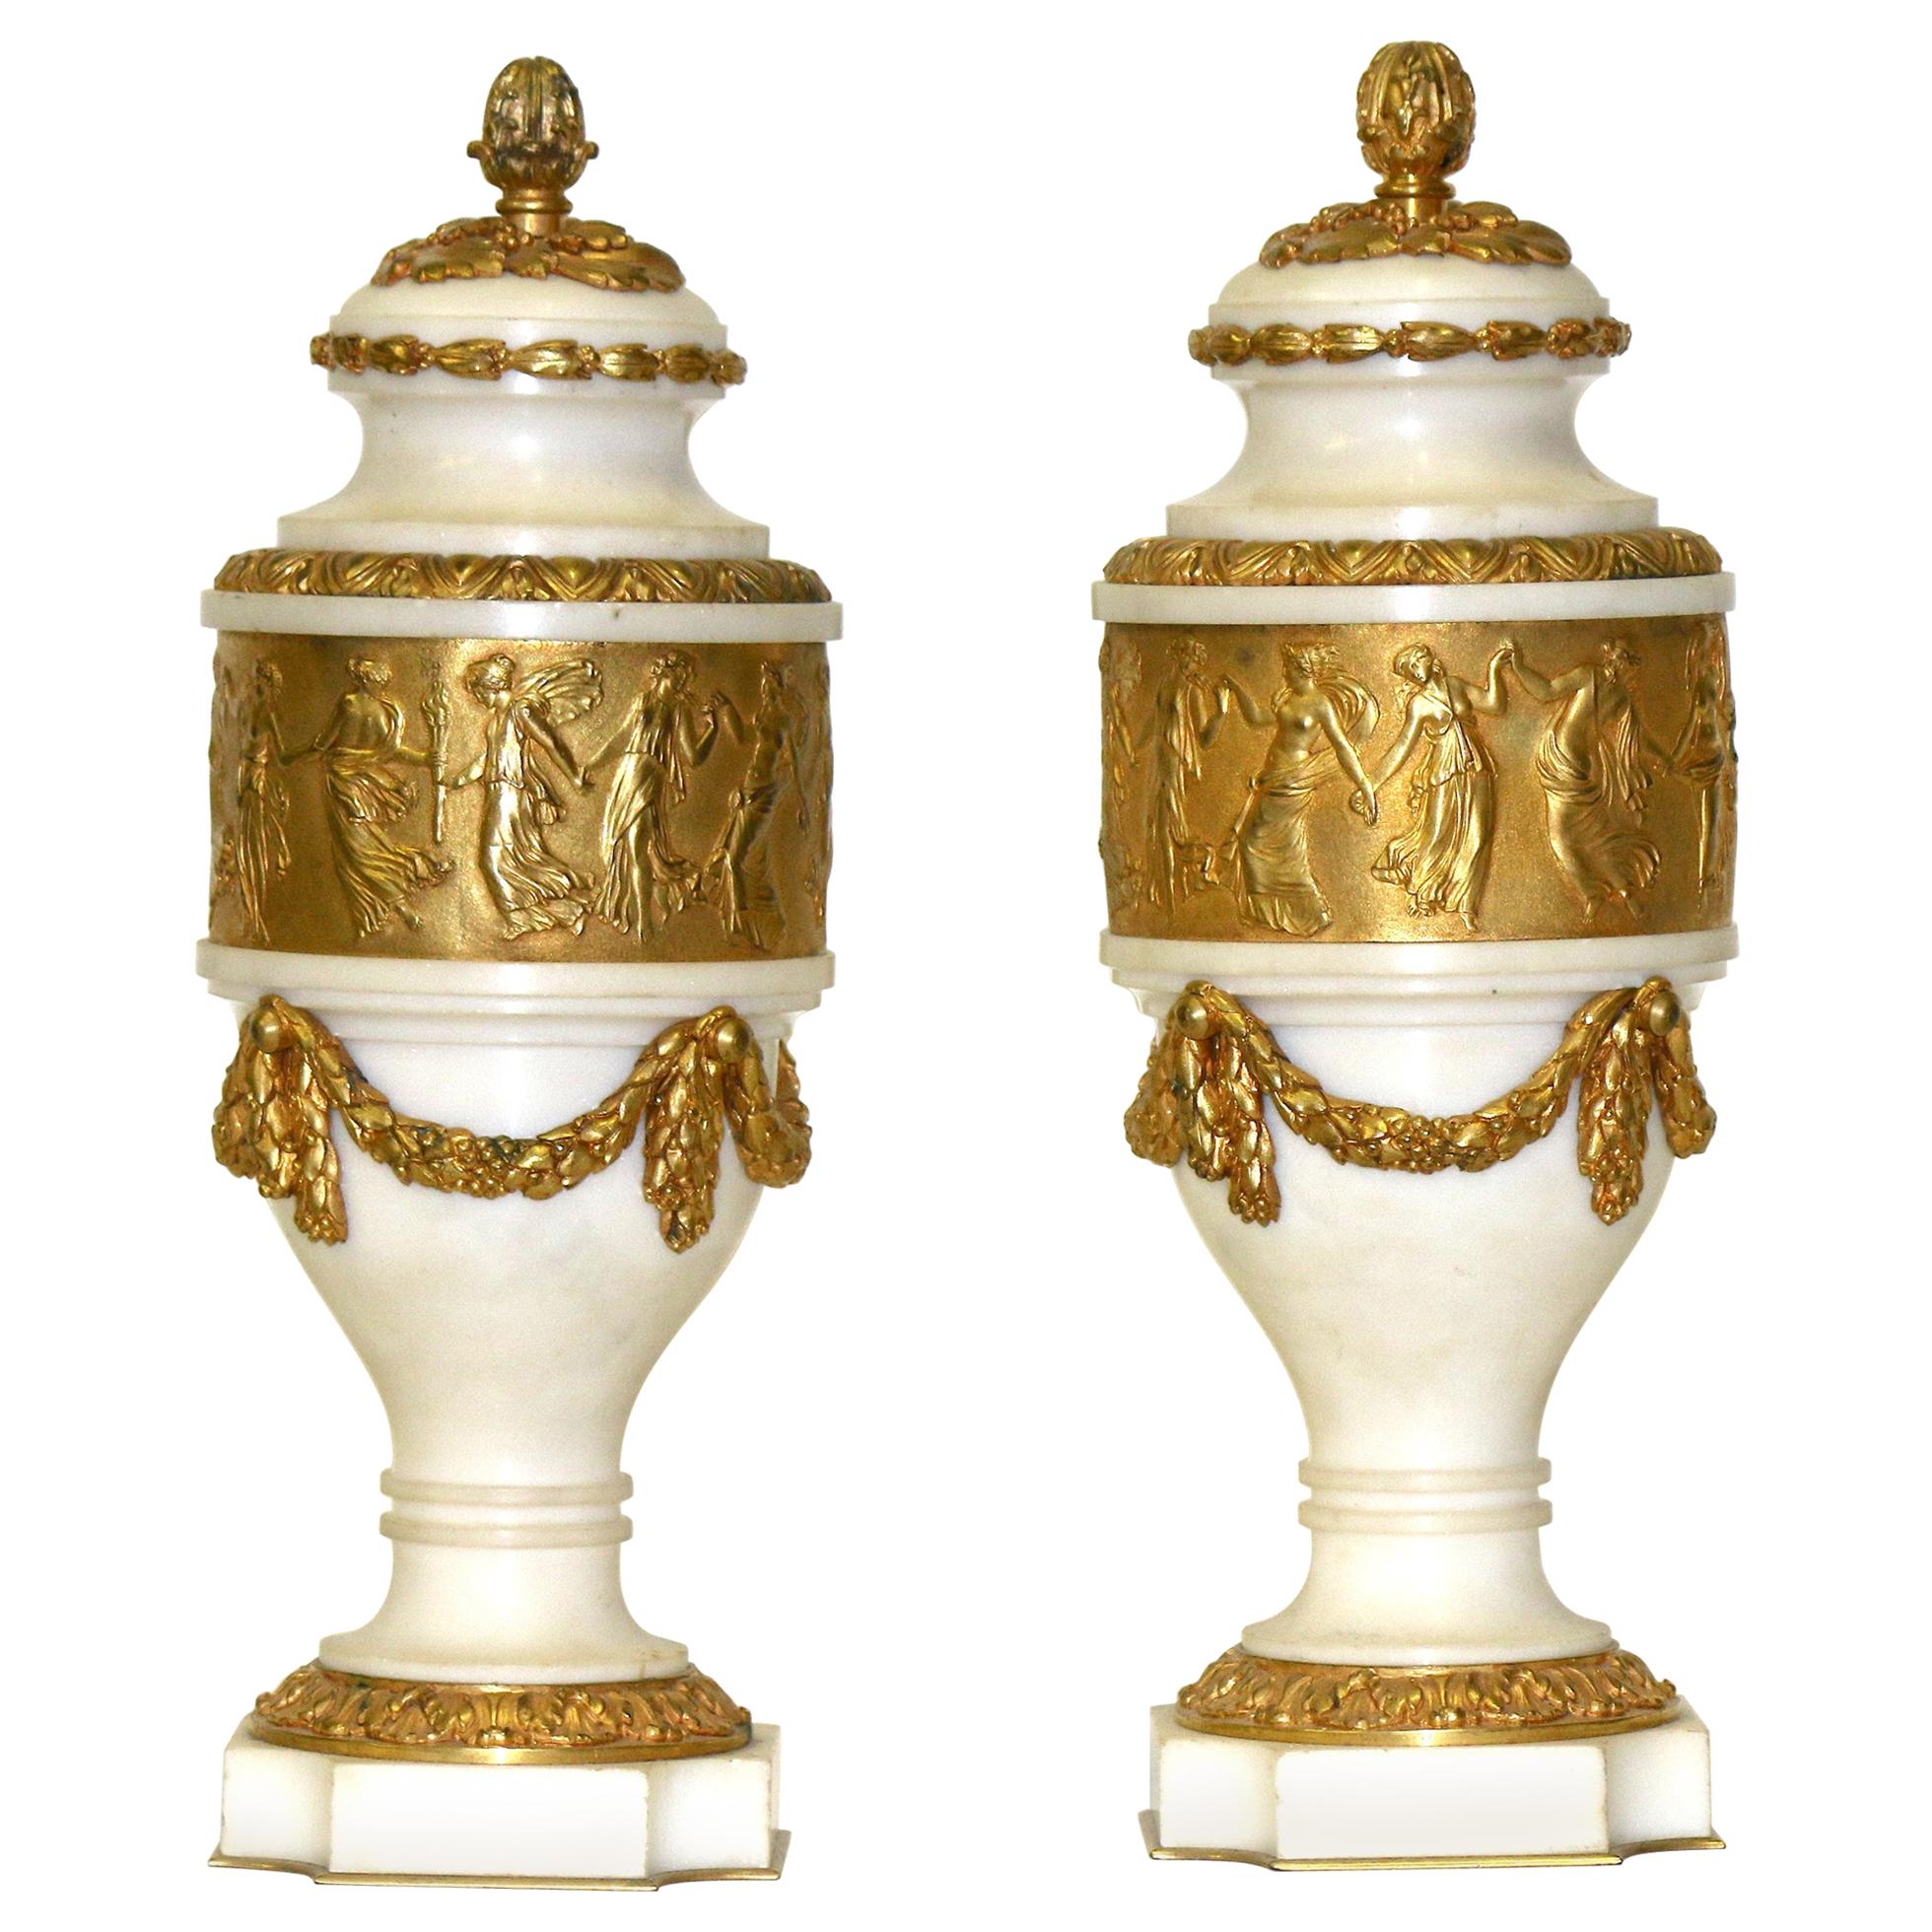 Signed Colin Paris Marble Gilt Bronze Cassolettes, circa 1860 Oil Tycoon's For Sale